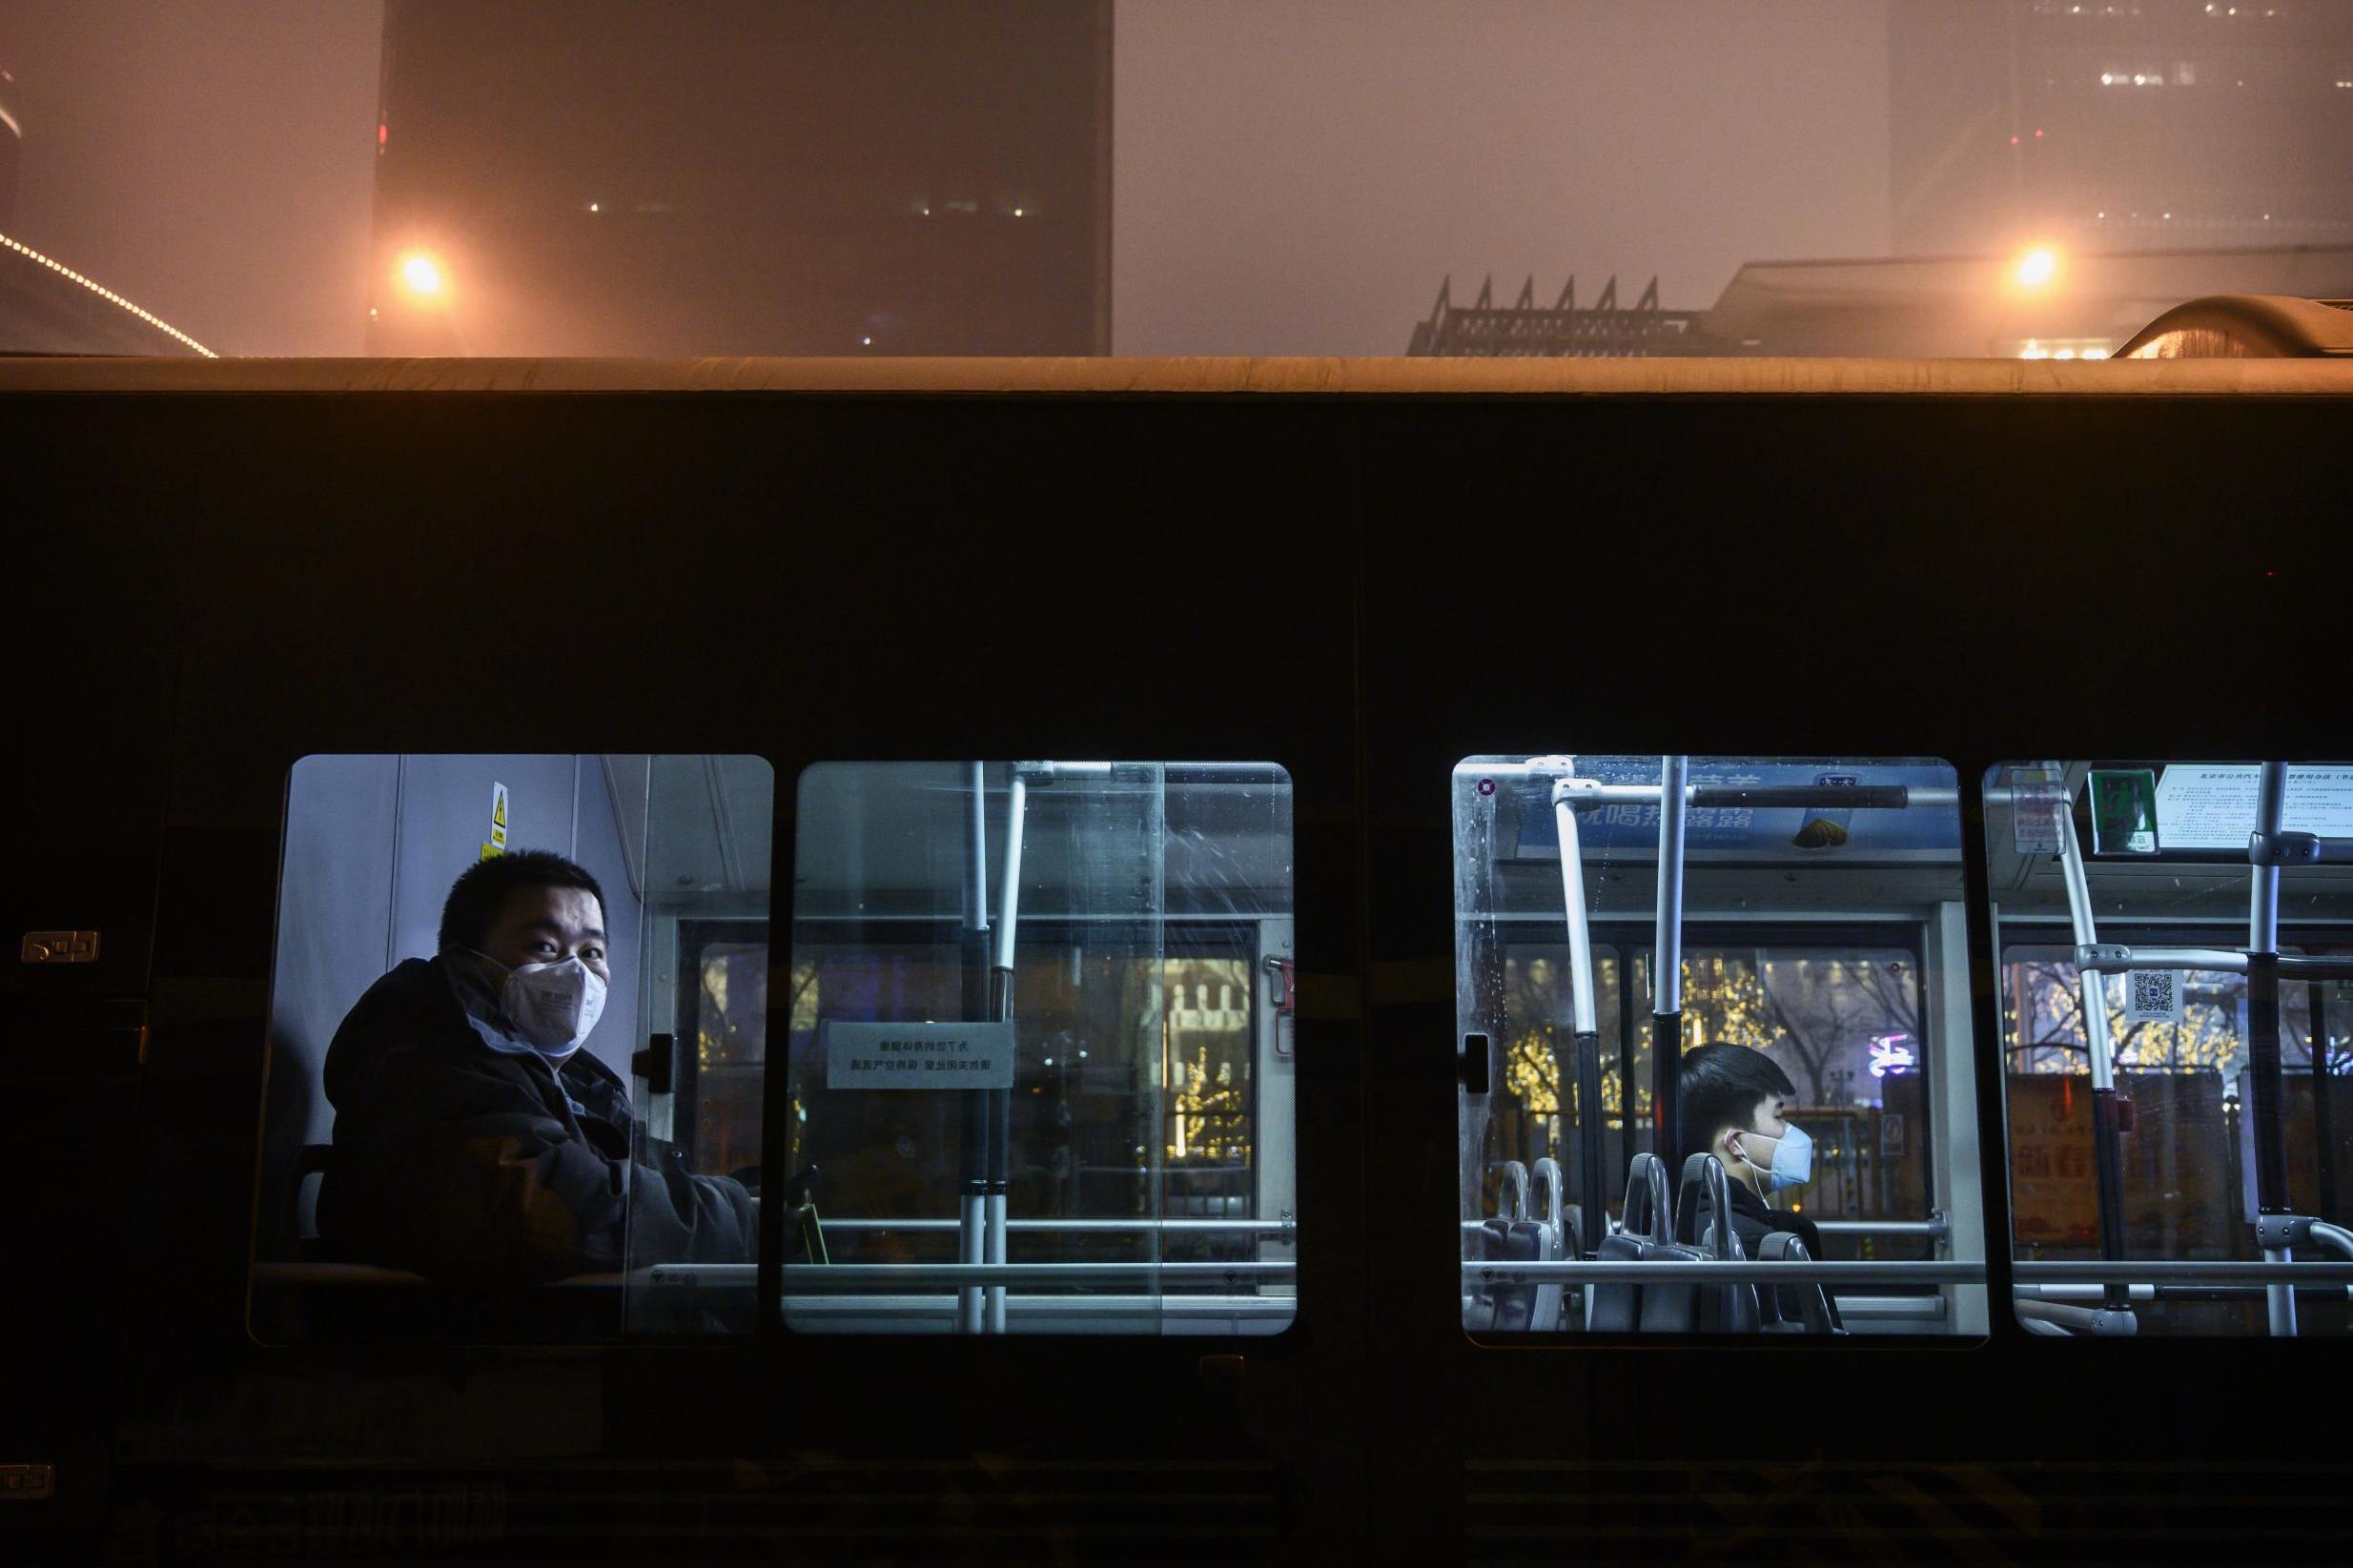 Stories have circulated in contemporary Beijing of supernatural encounters on the night bus